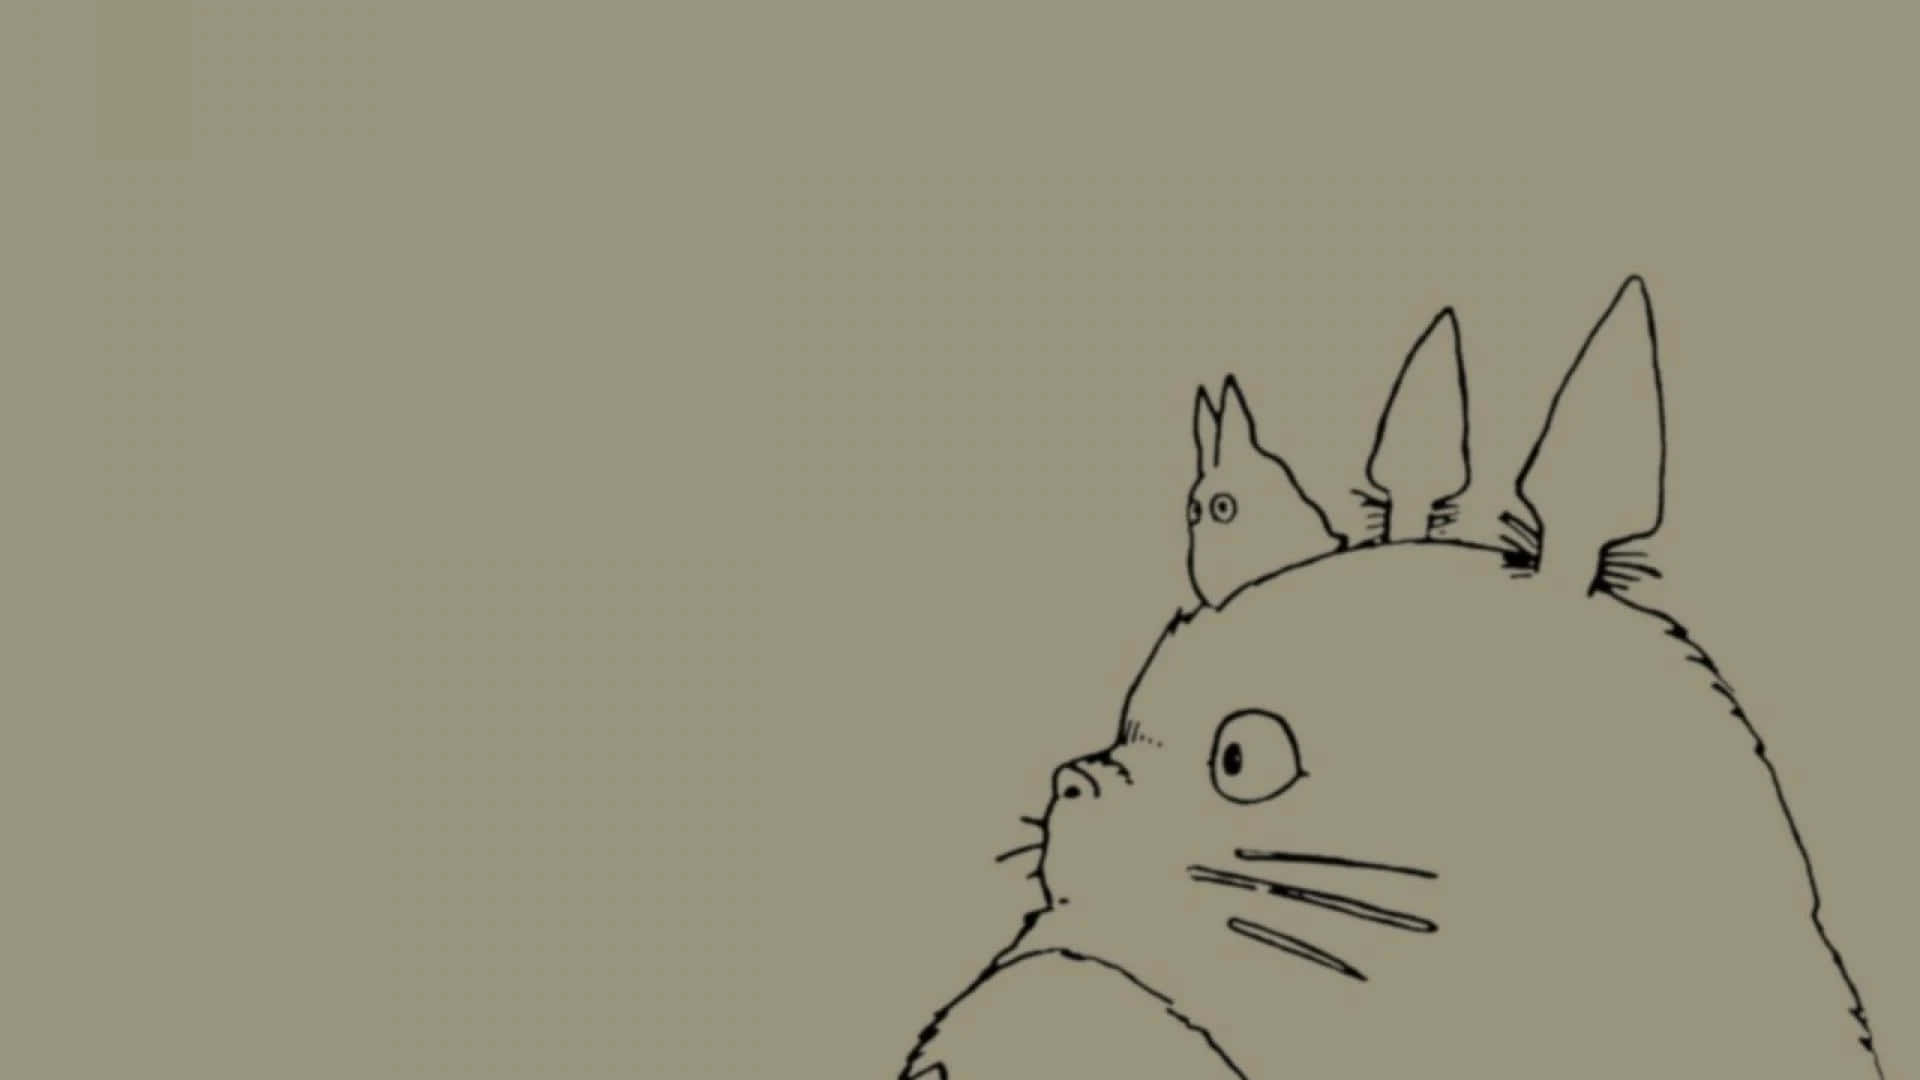 Welcome to the wondrous world of Totoro